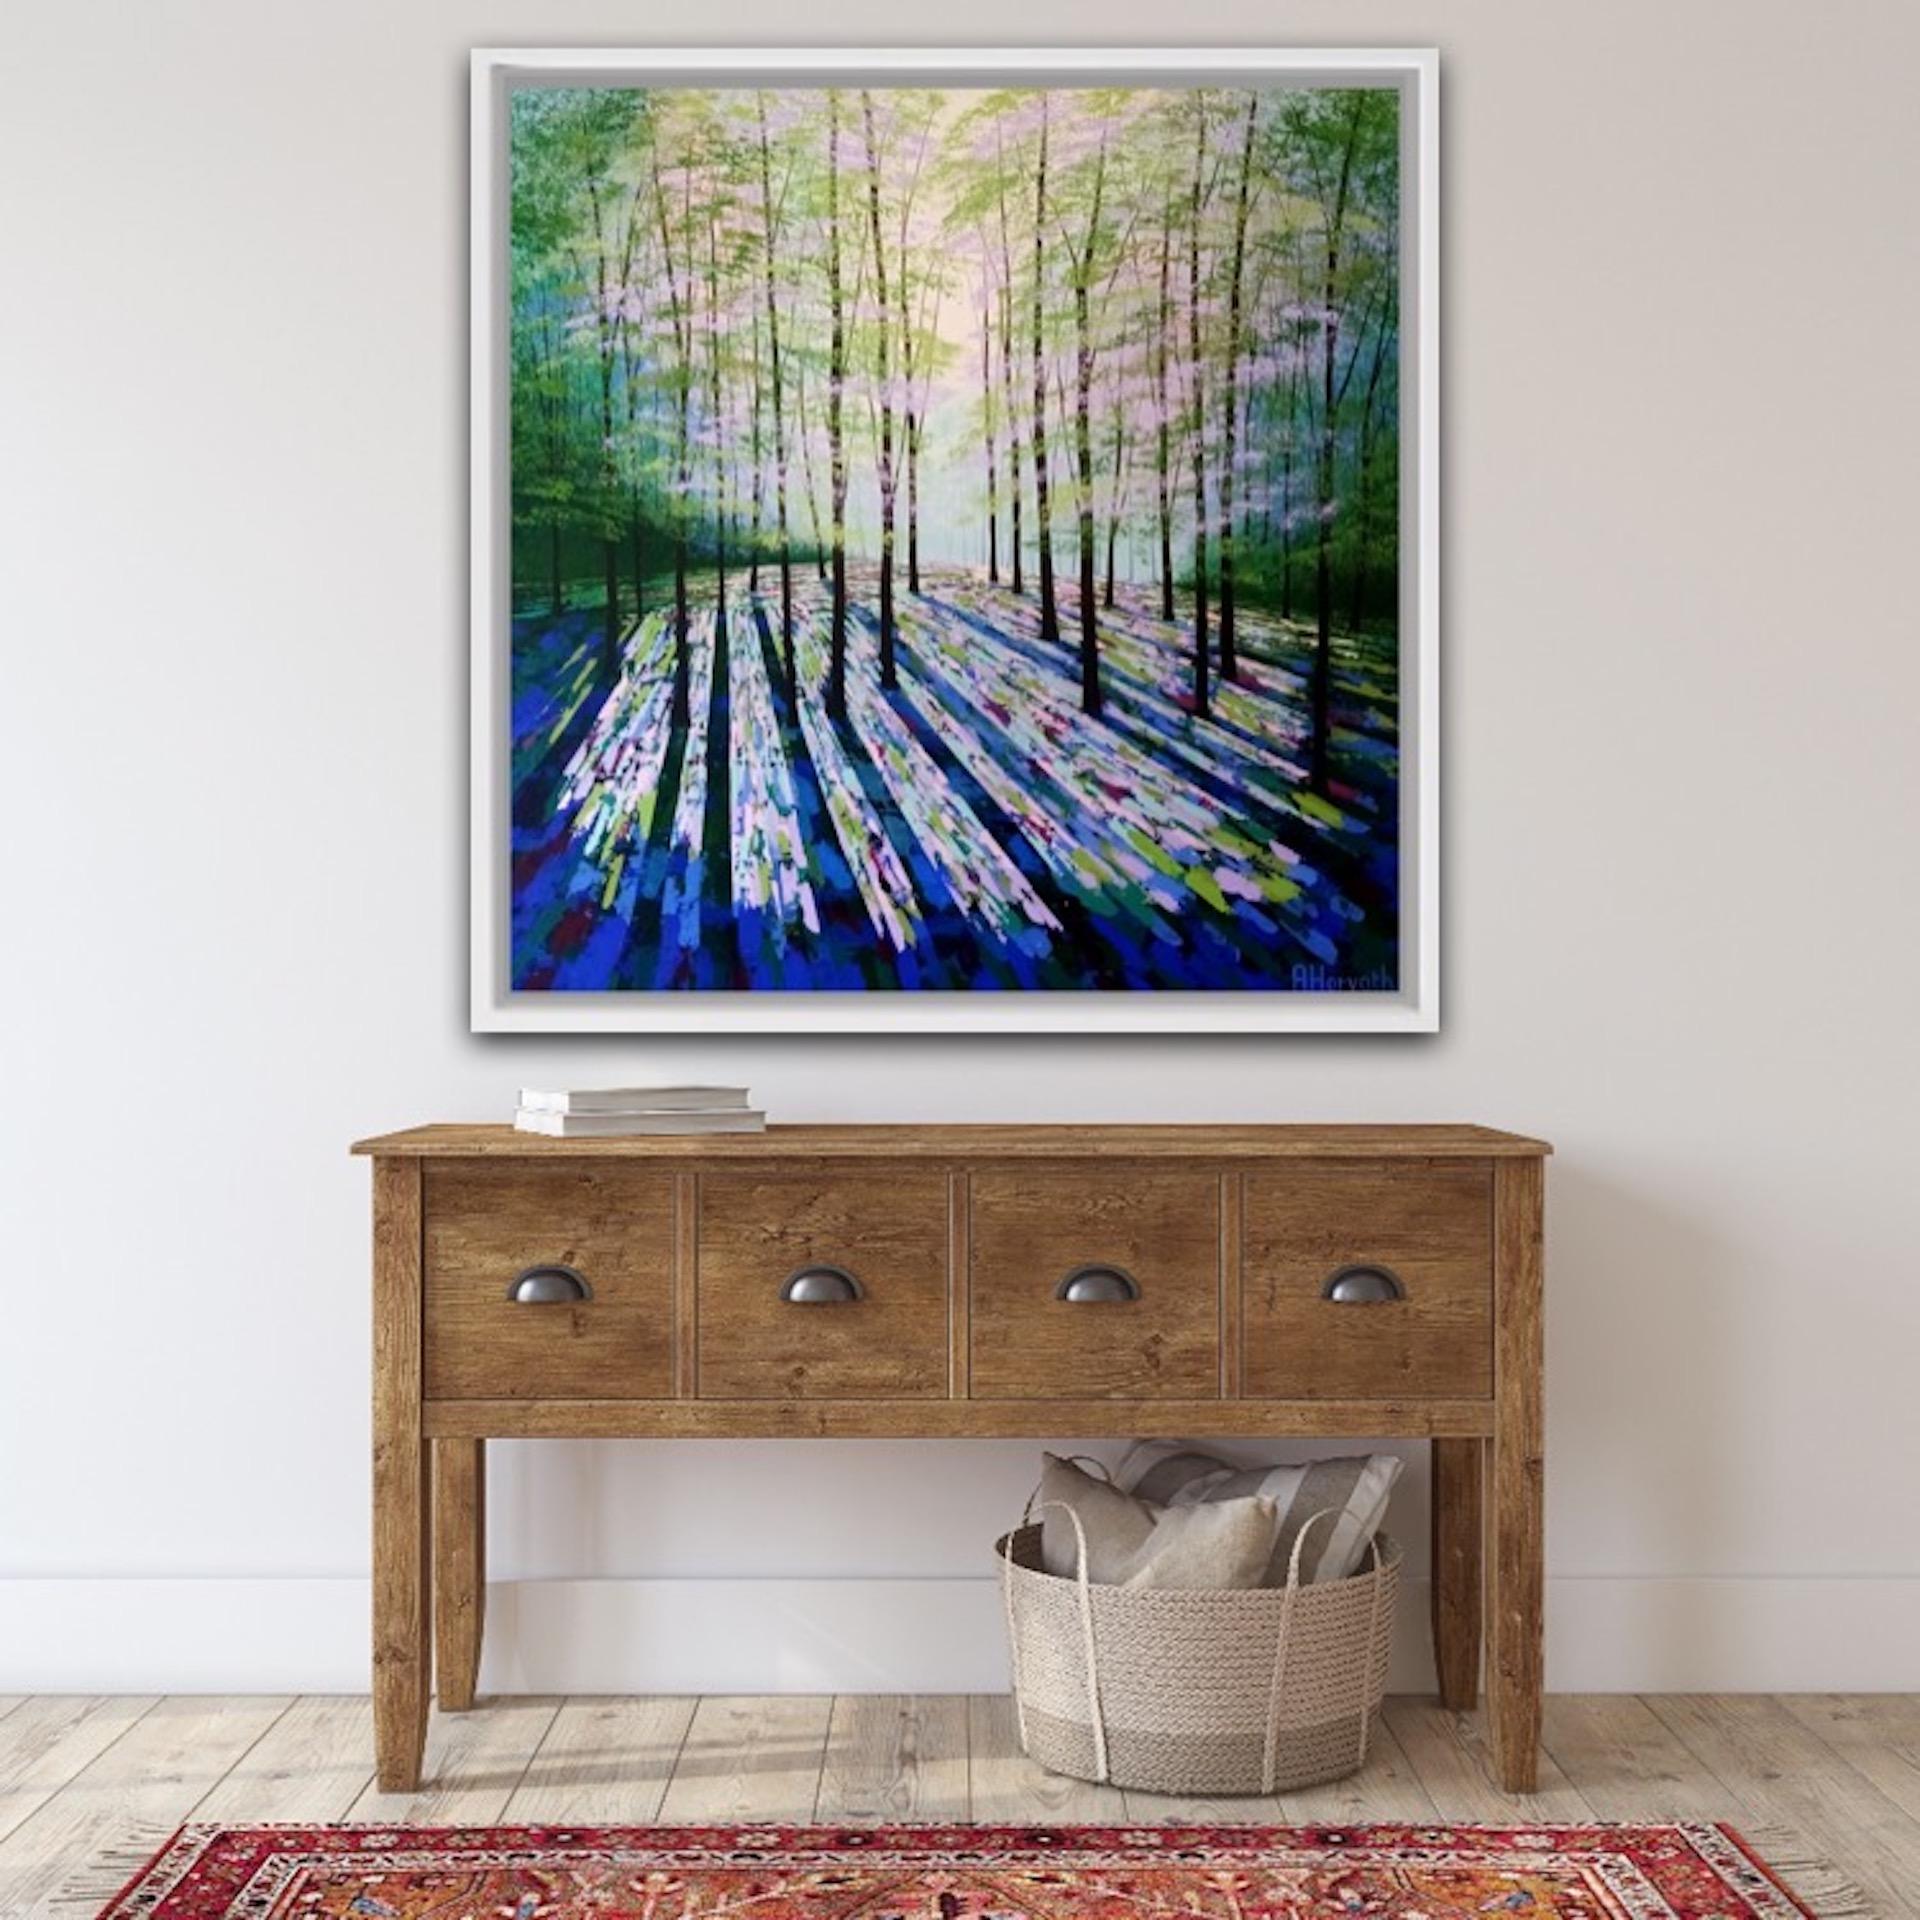 Amanda Horvath
Summer Sanctuary
Original Acrylic Painting on Canvas
Acrylics on canvas
Canvas Size: 91cm x 91cm x 3.5cm
Sold Unframed

This painting captures the beautiful woods near my home in the Peak District during Summer. The abstract marks